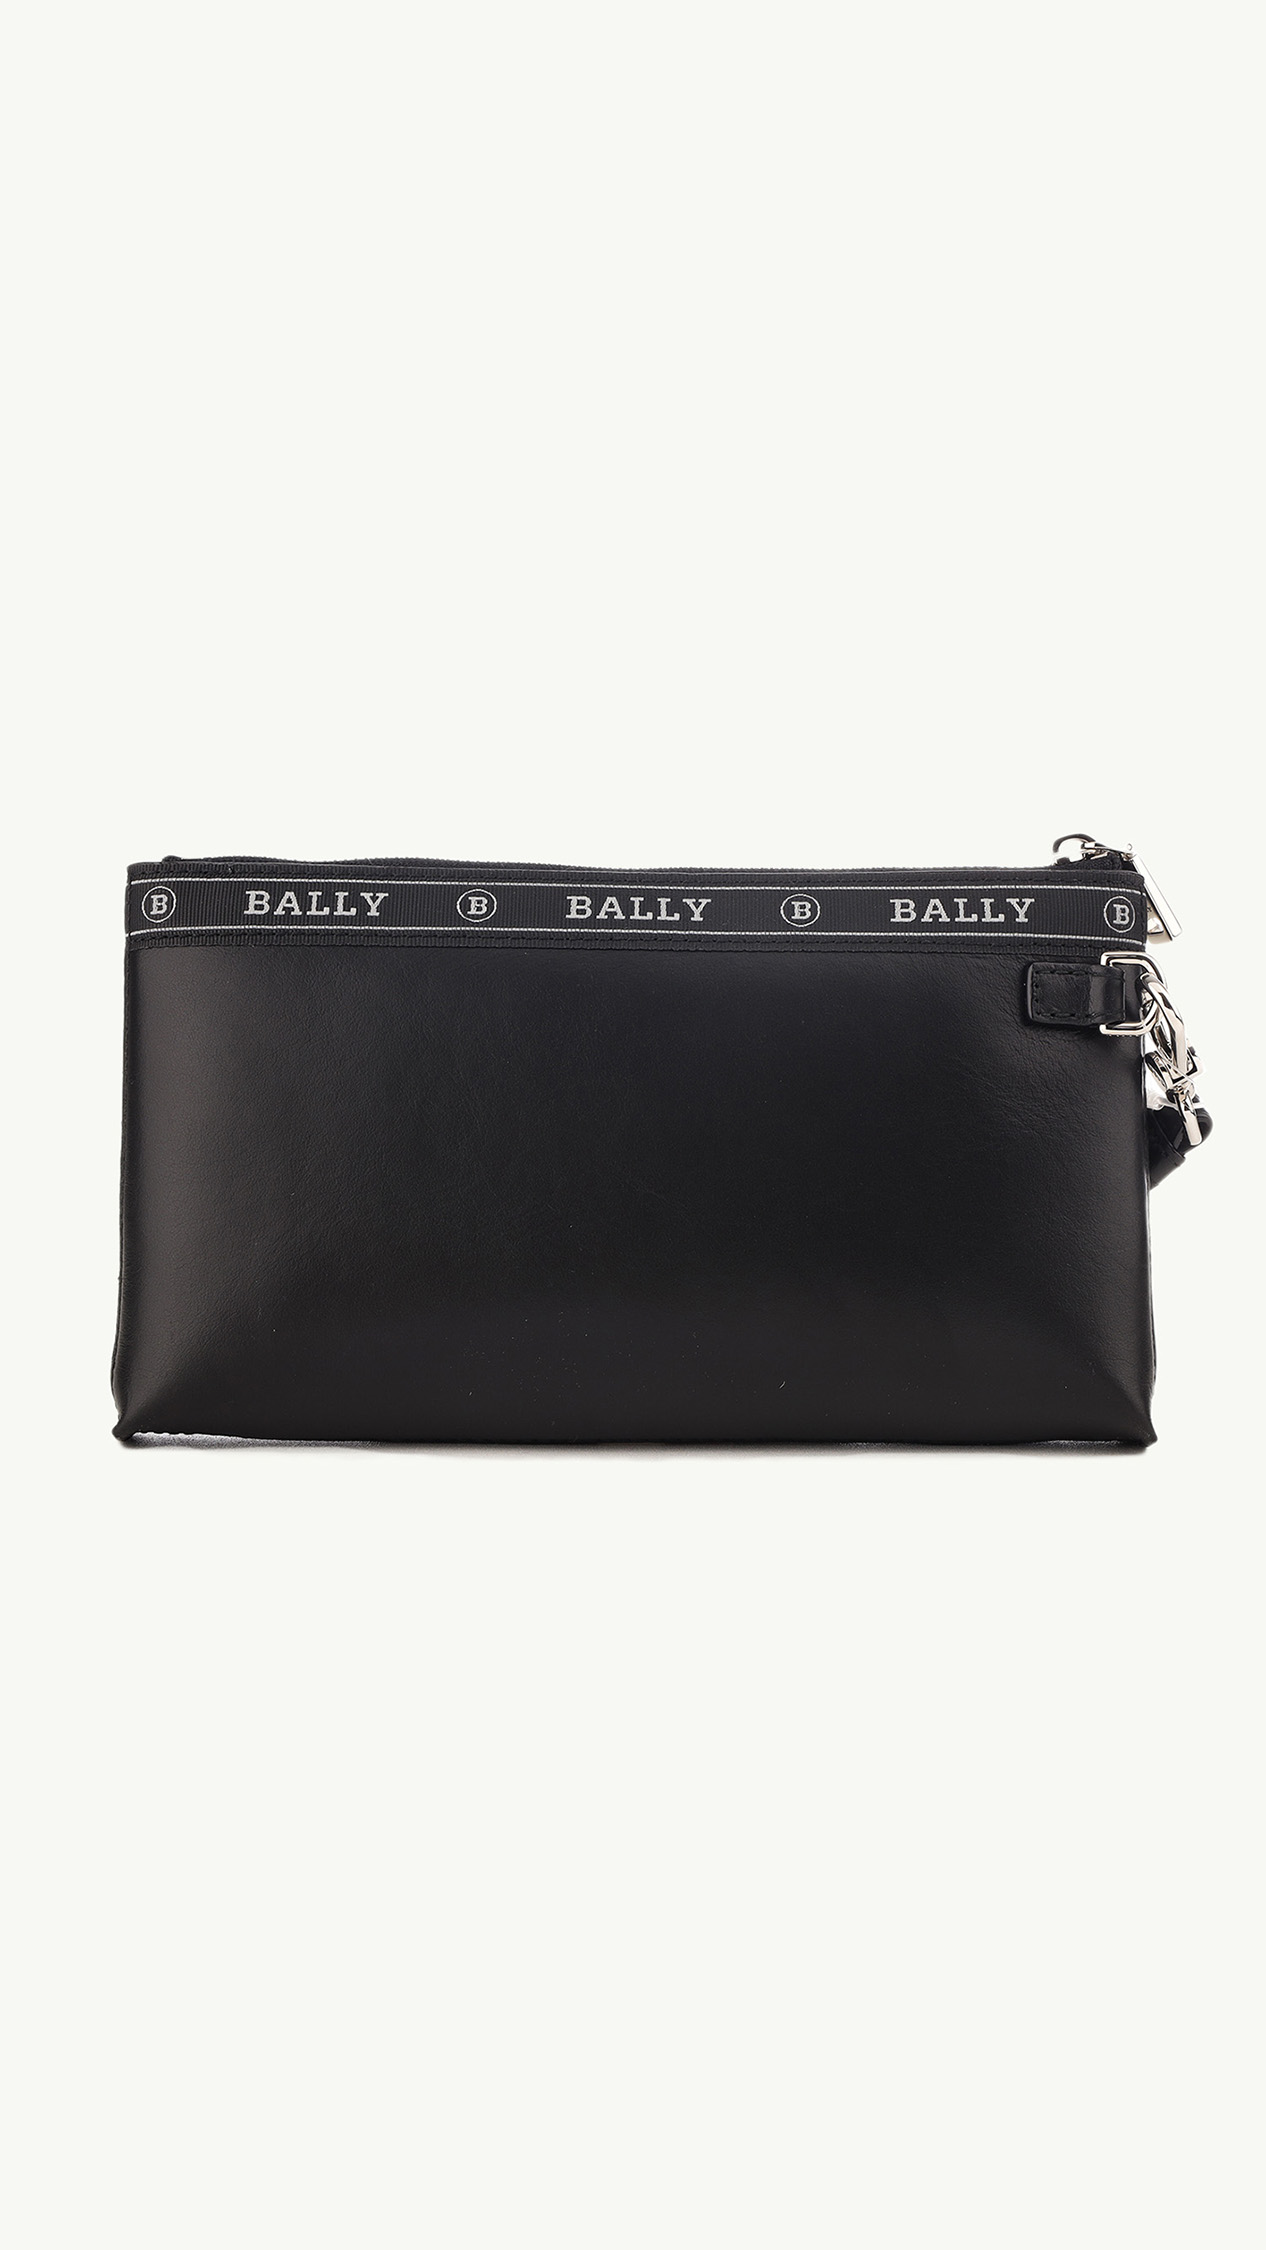 BALLY Beryer Phone Wallet in Black Bovine Leather with Red/White Stripe 1